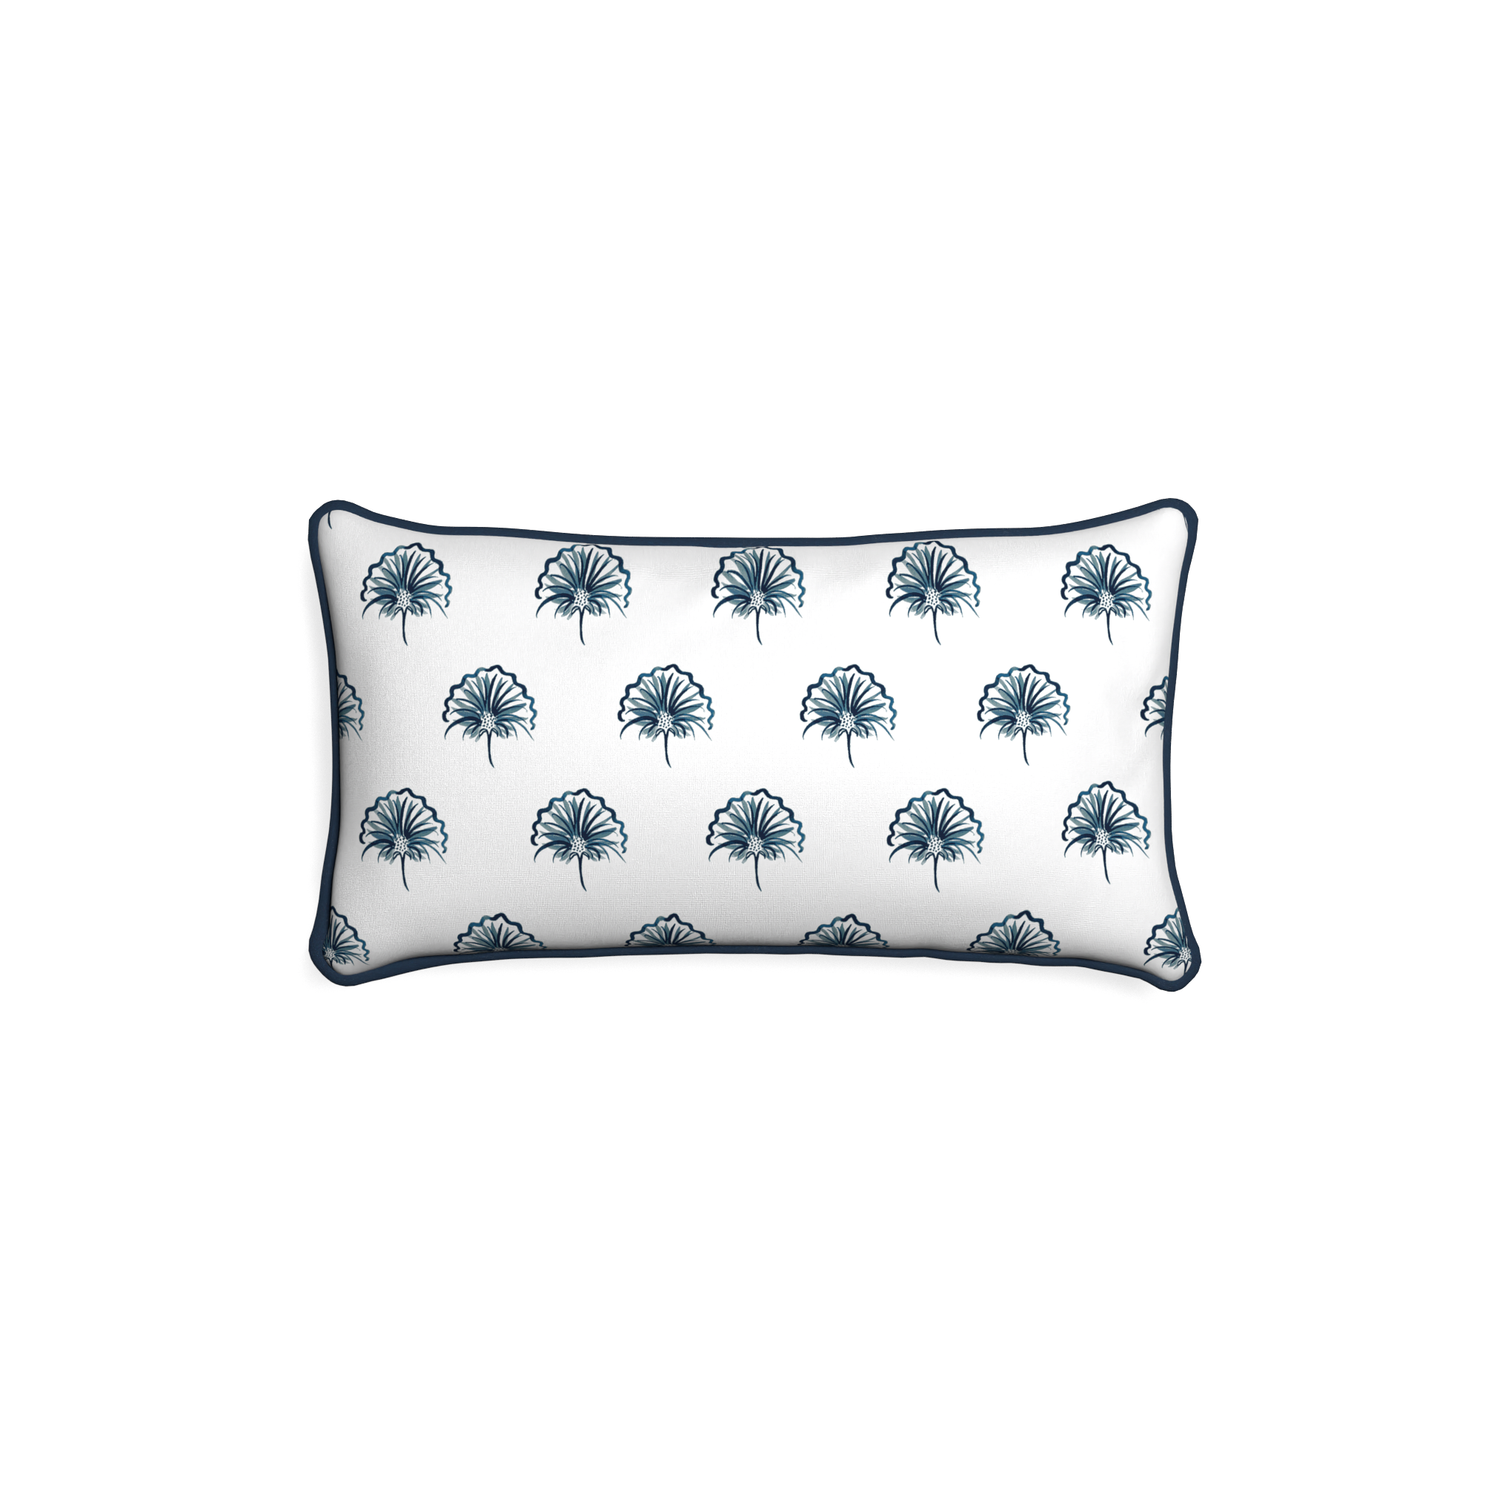 Petite-lumbar penelope midnight custom floral navypillow with c piping on white background